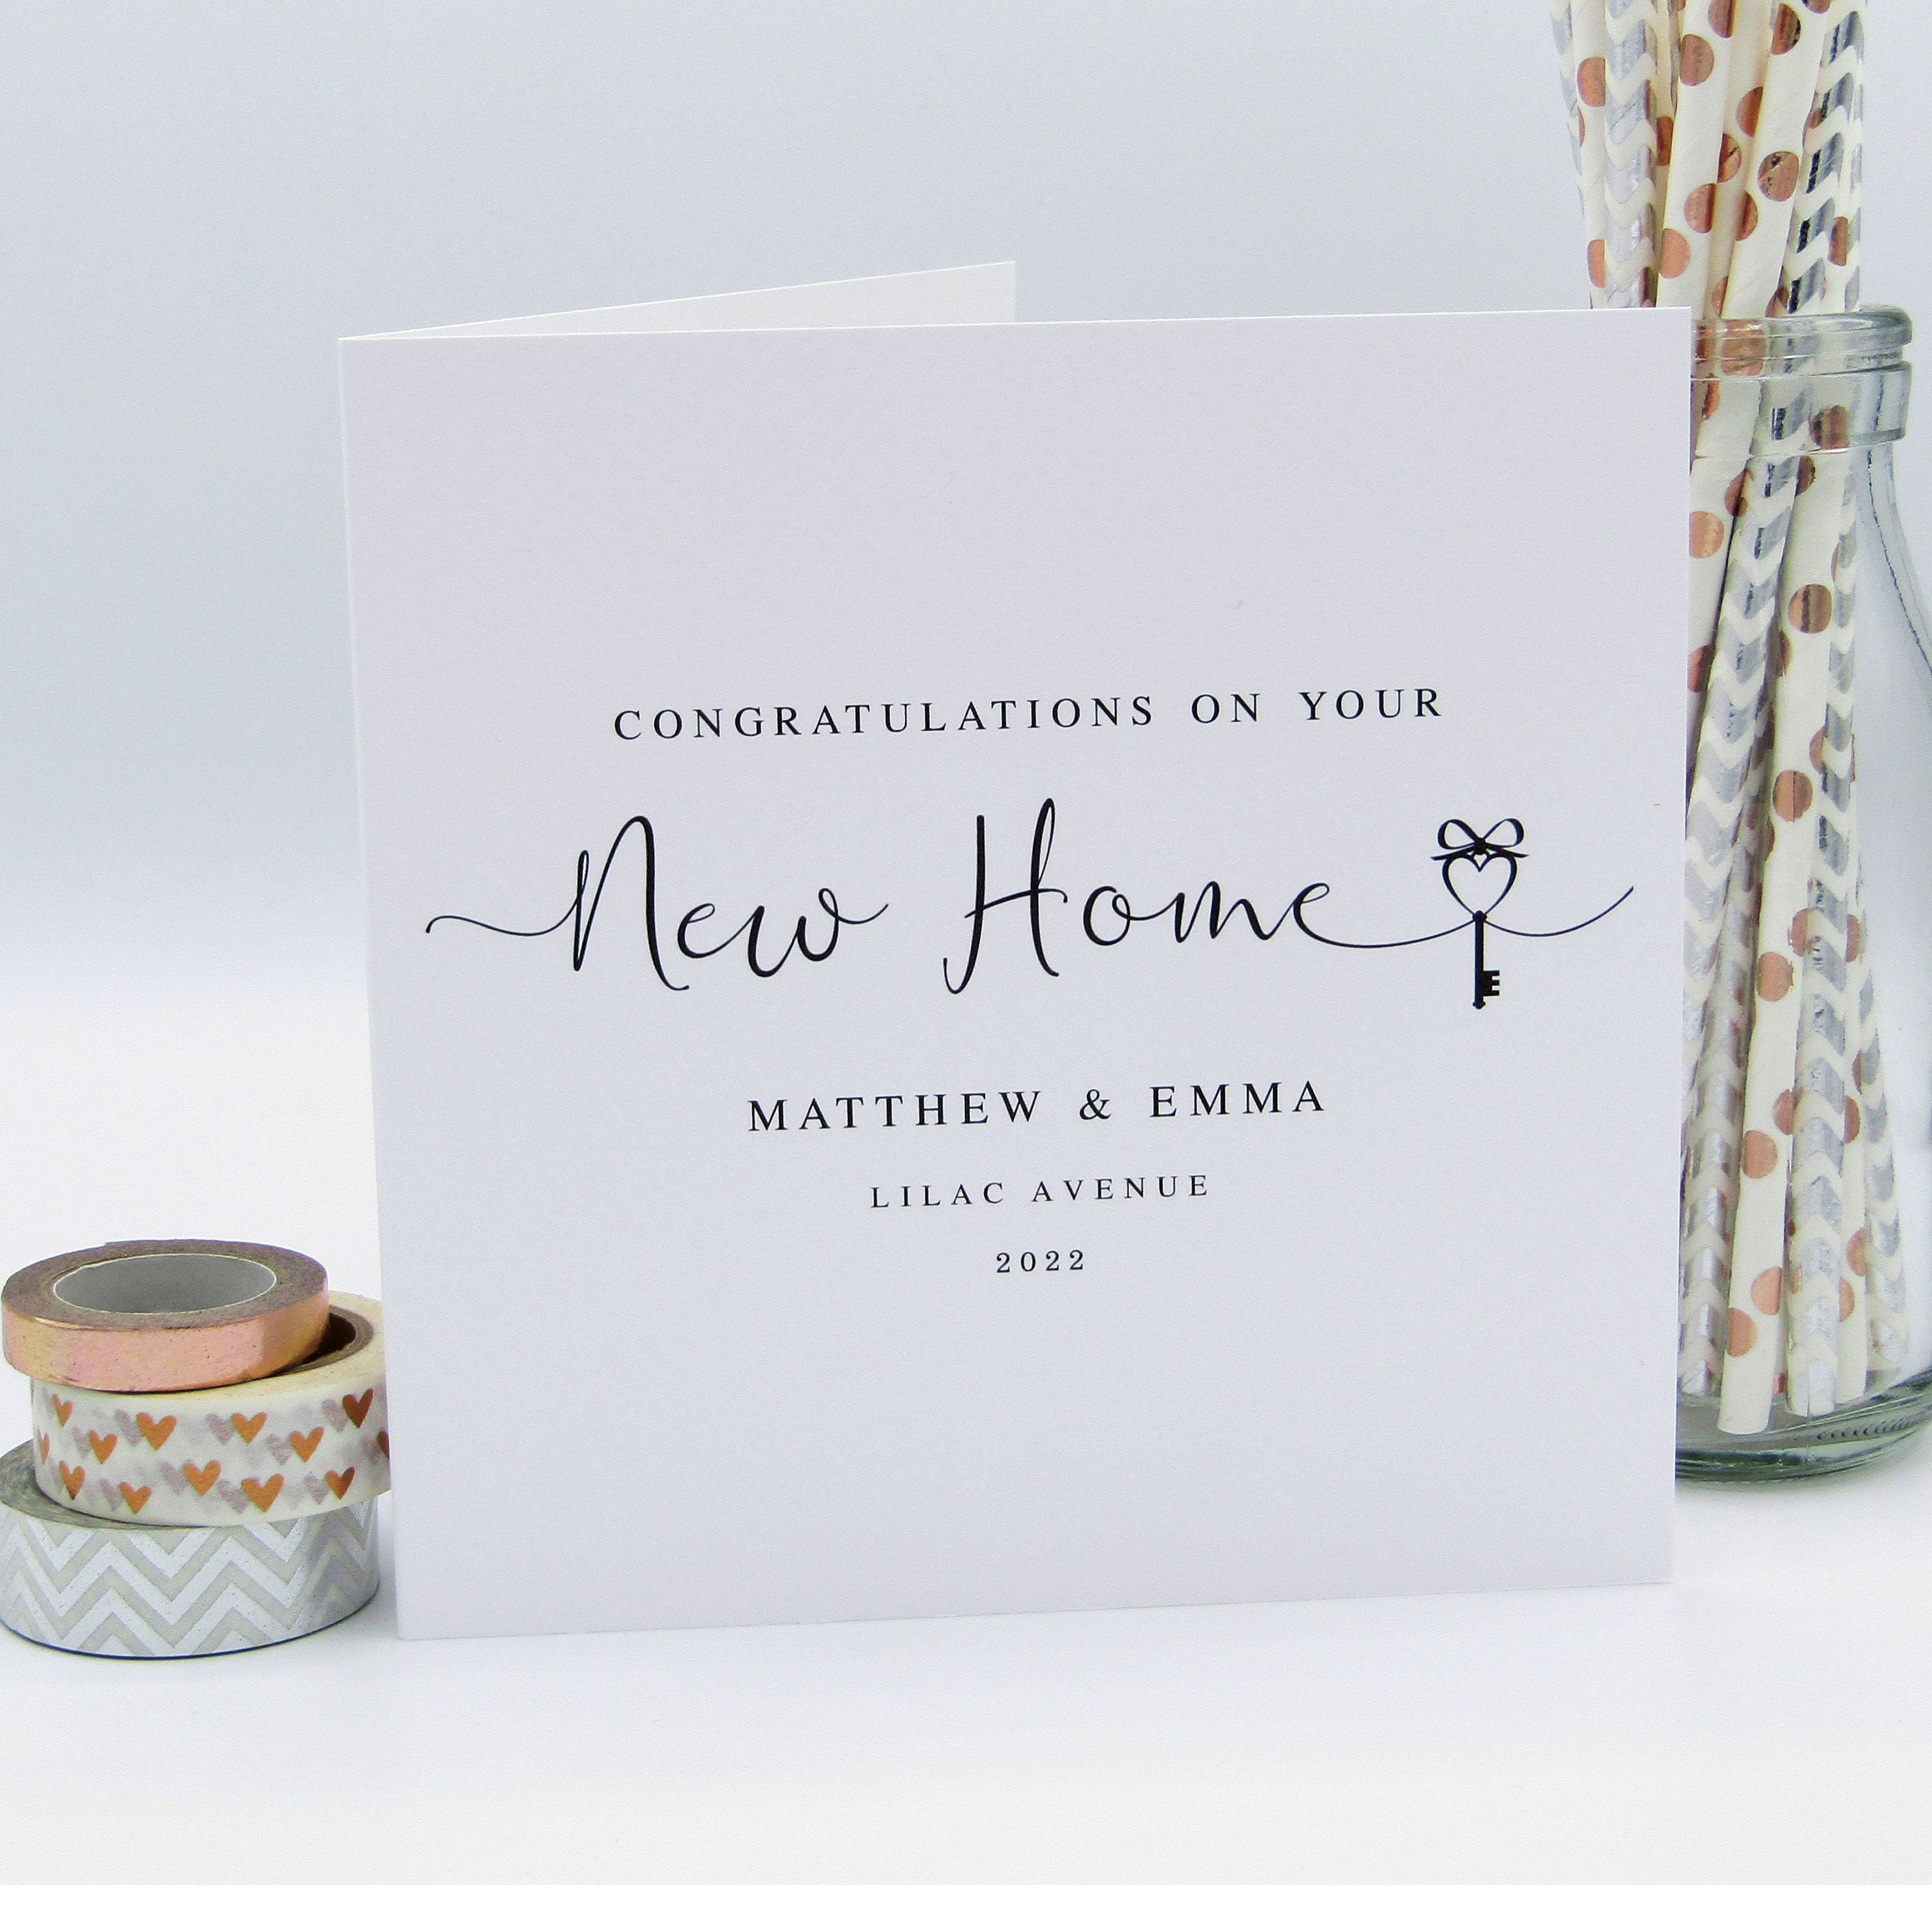 Personalised Congratulations on Your New Home Card Happy hq nude image